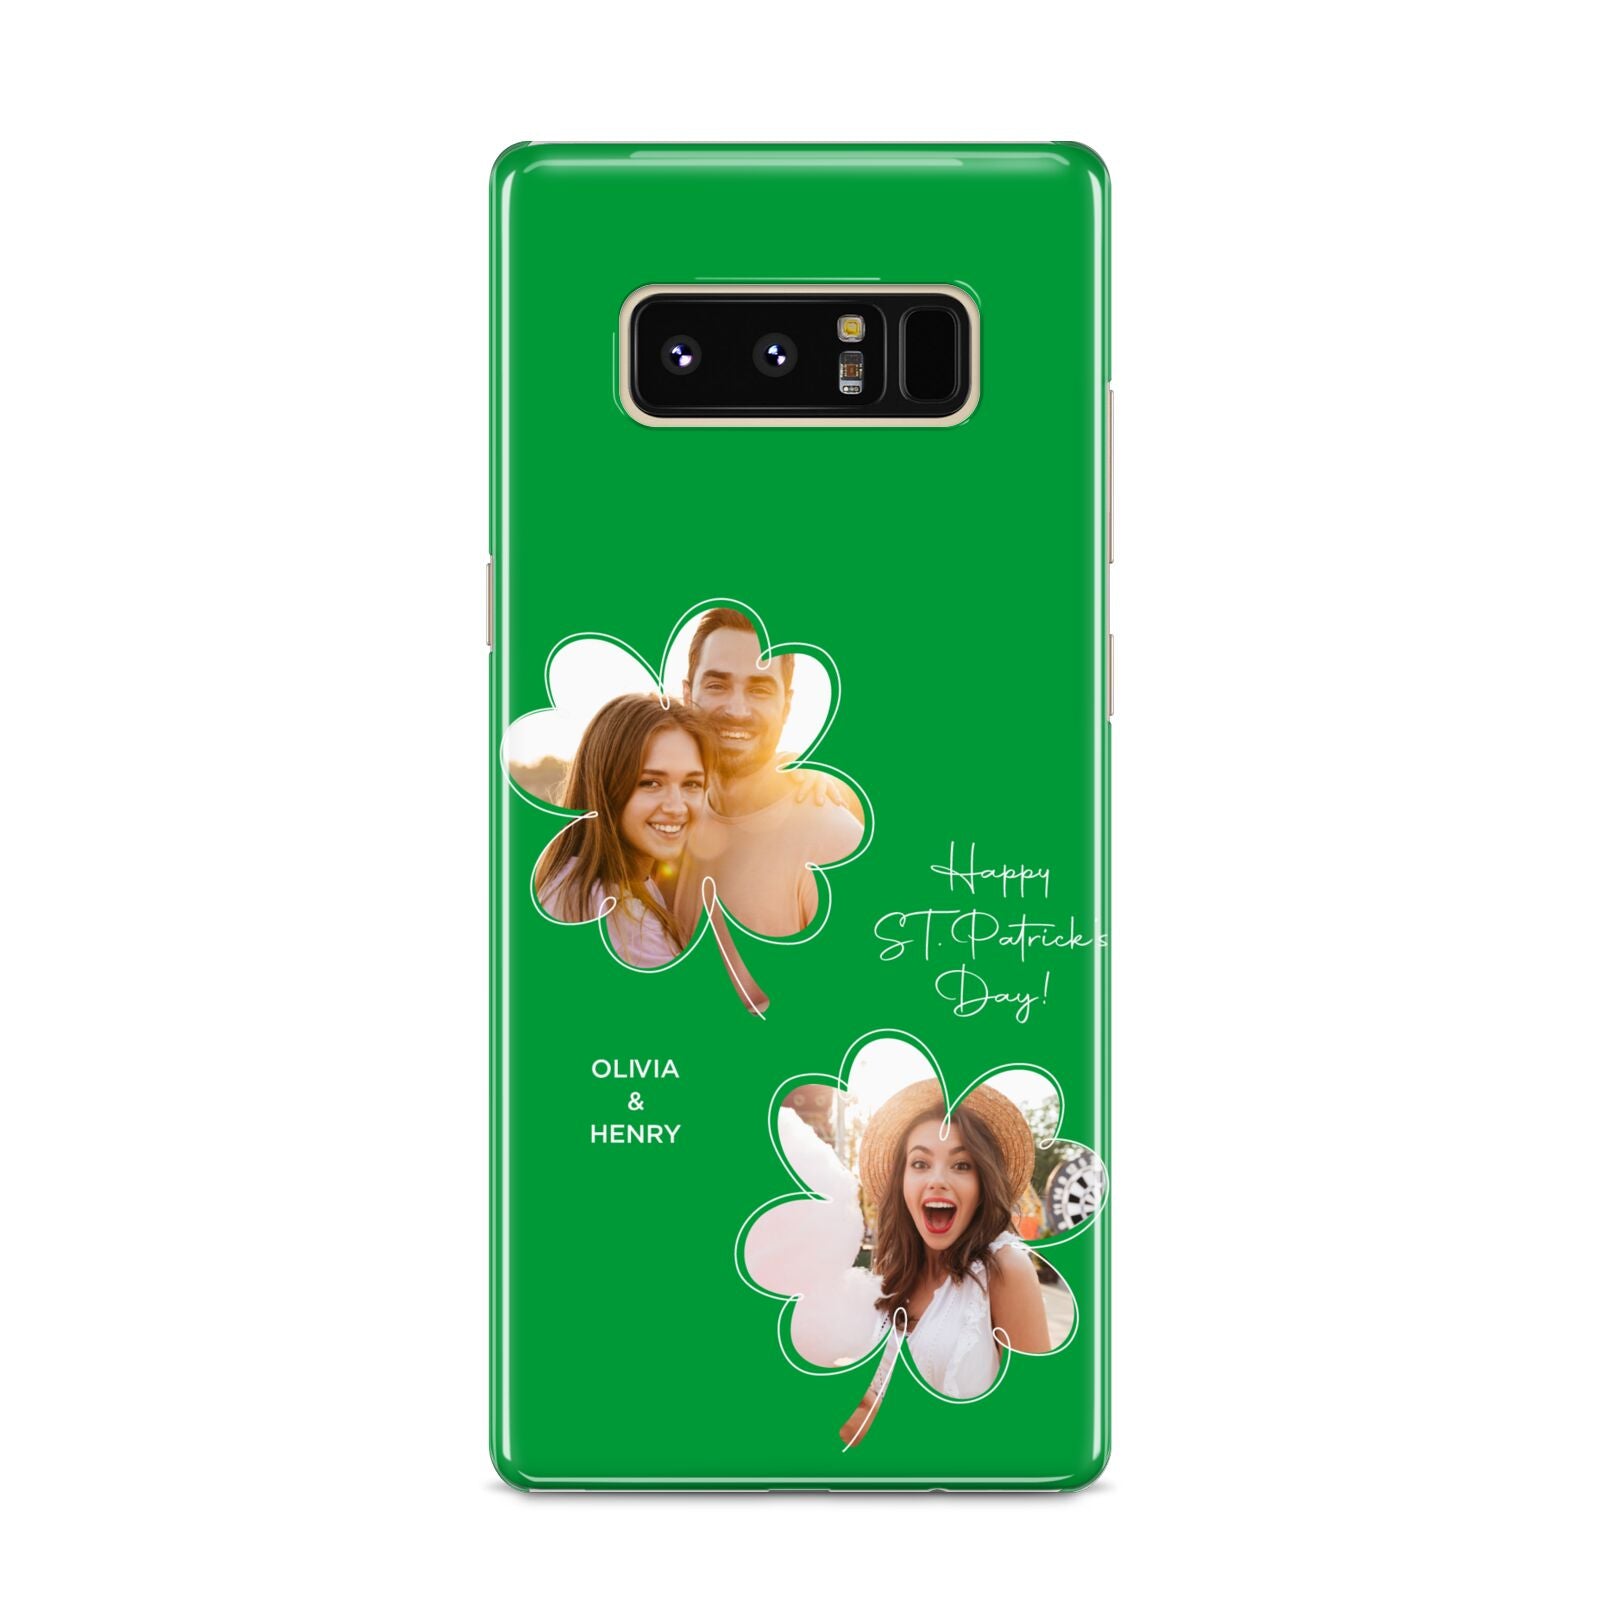 Personalised Photo St Patricks Day Samsung Galaxy S8 Case